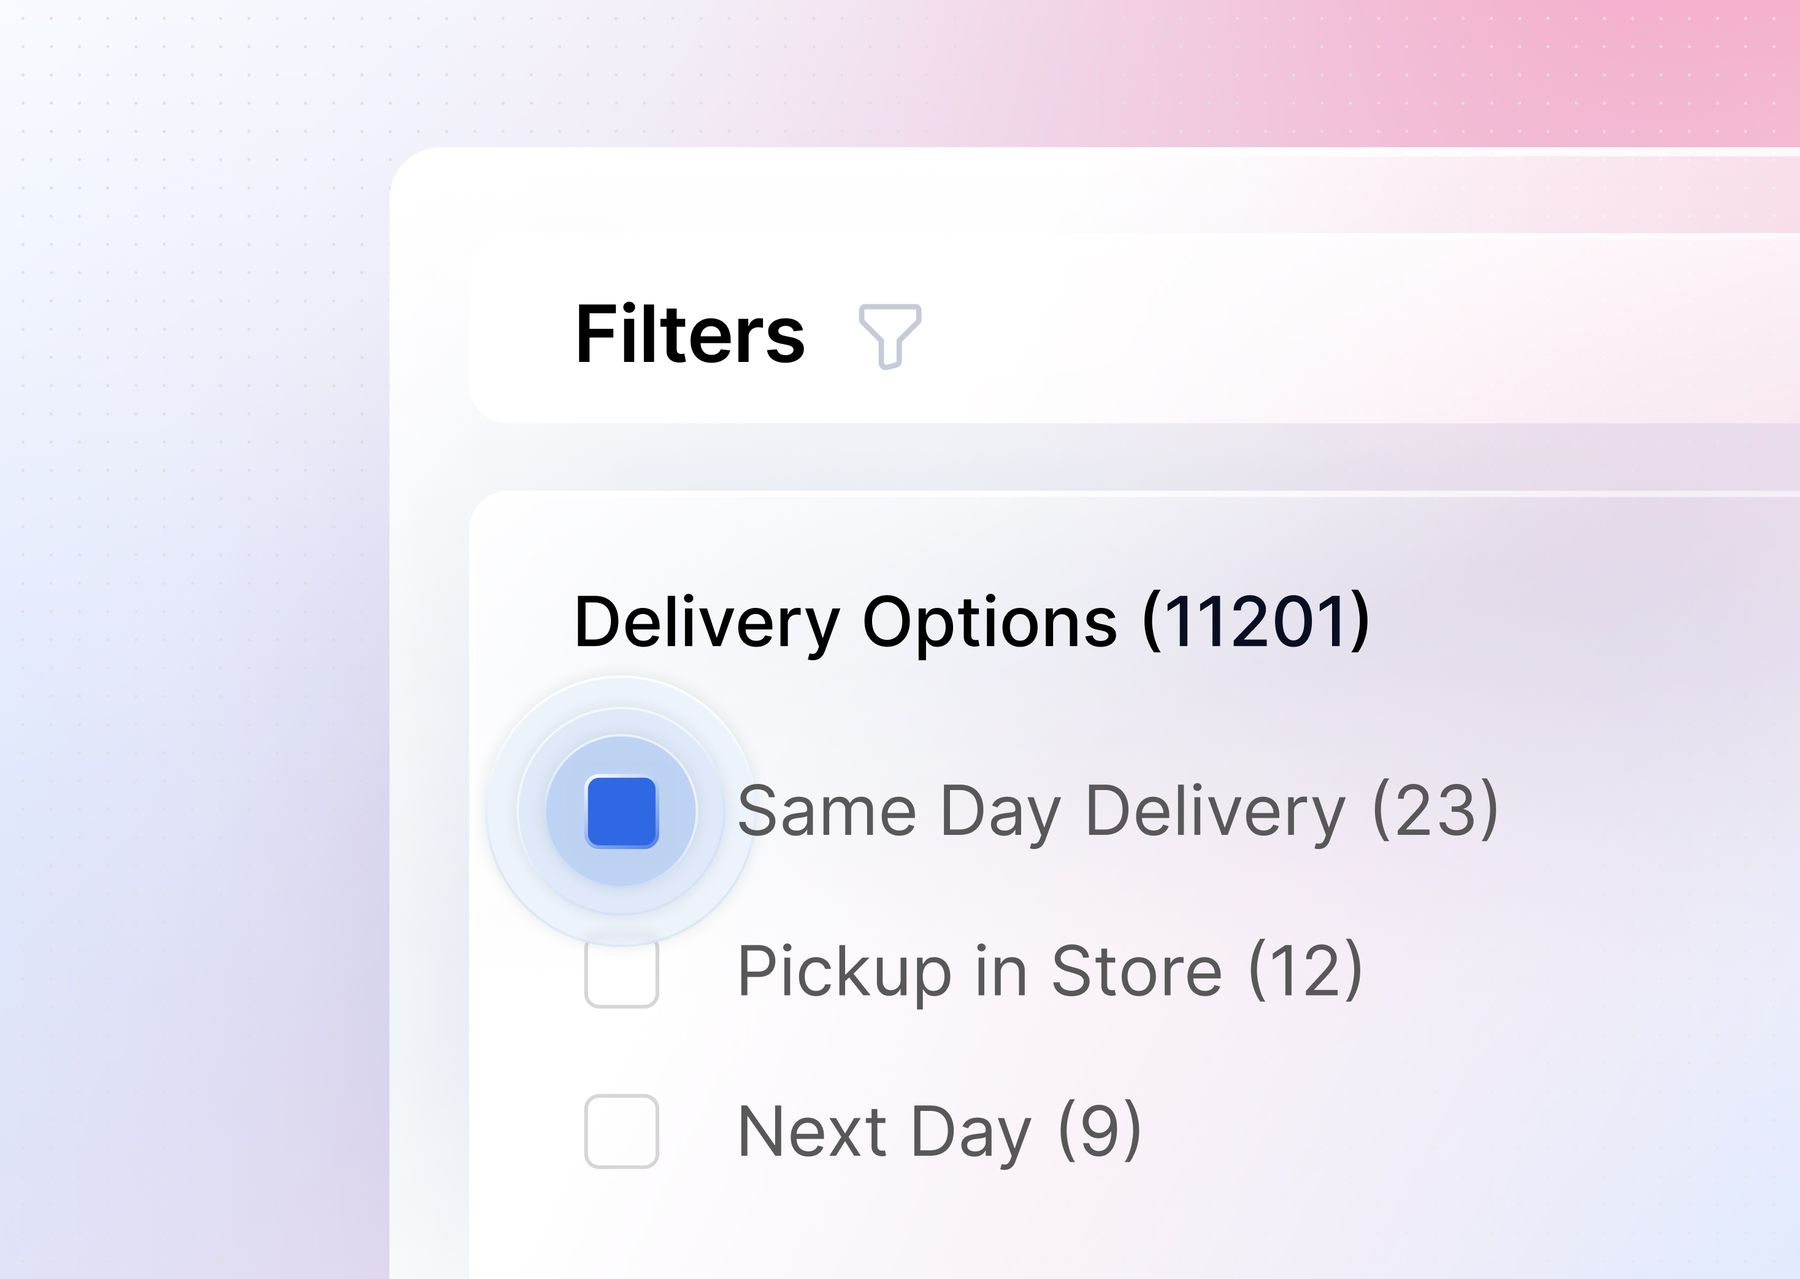 Capture more orders with Delivery Promises that don't let customers down